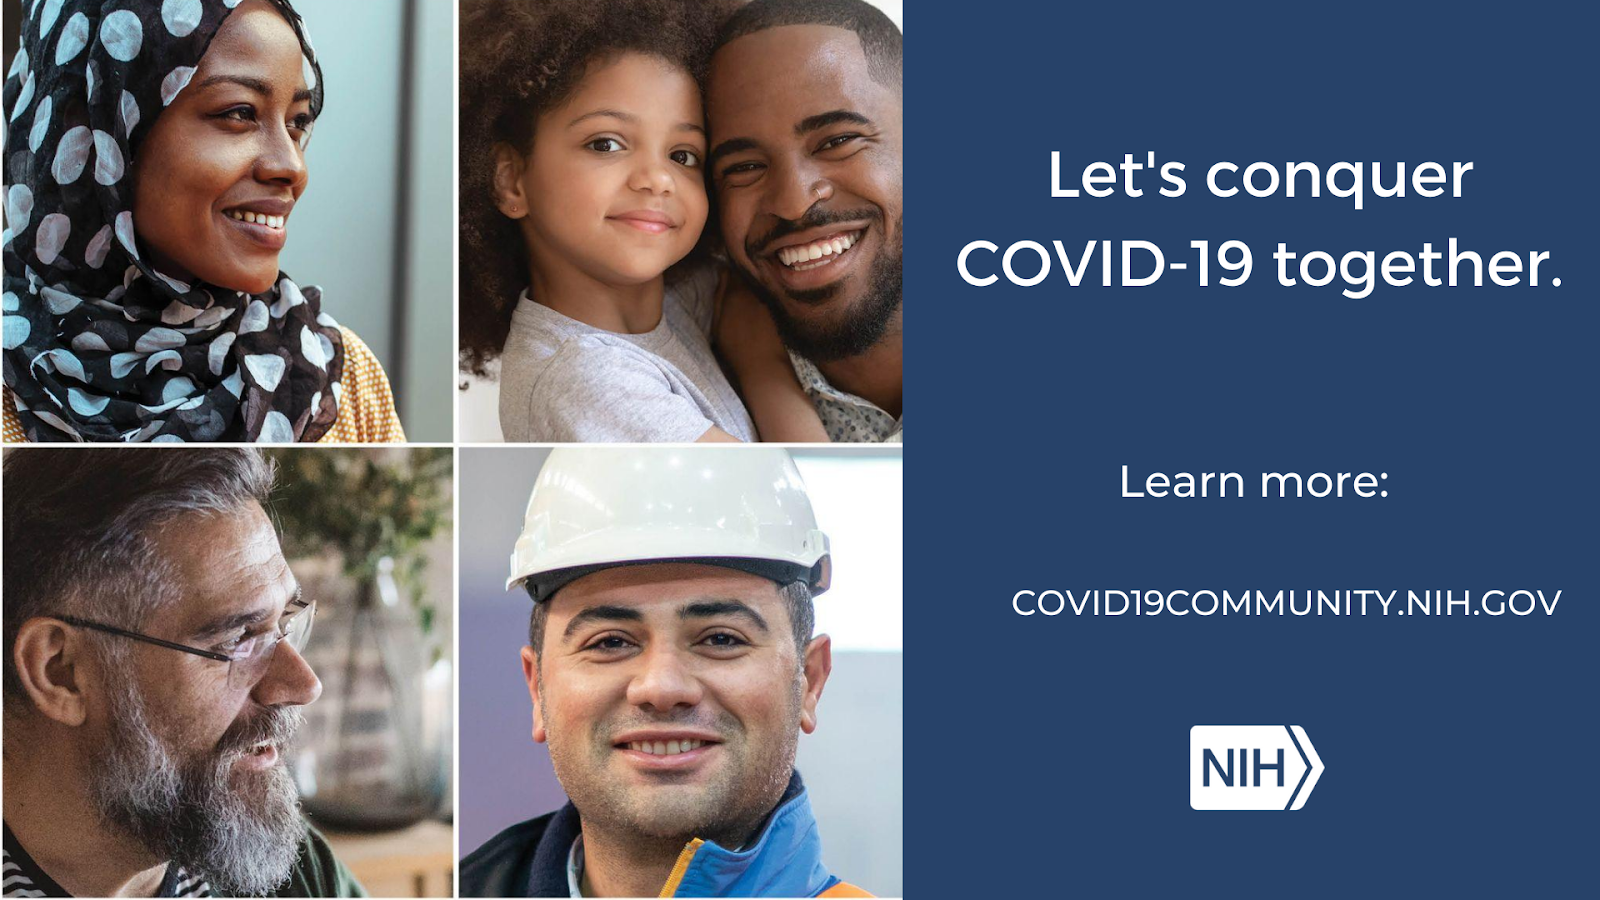 Collage of individual headshots that reads: "Let's conquer COVID-19 together. Learn more: covid19community.nih.gov"